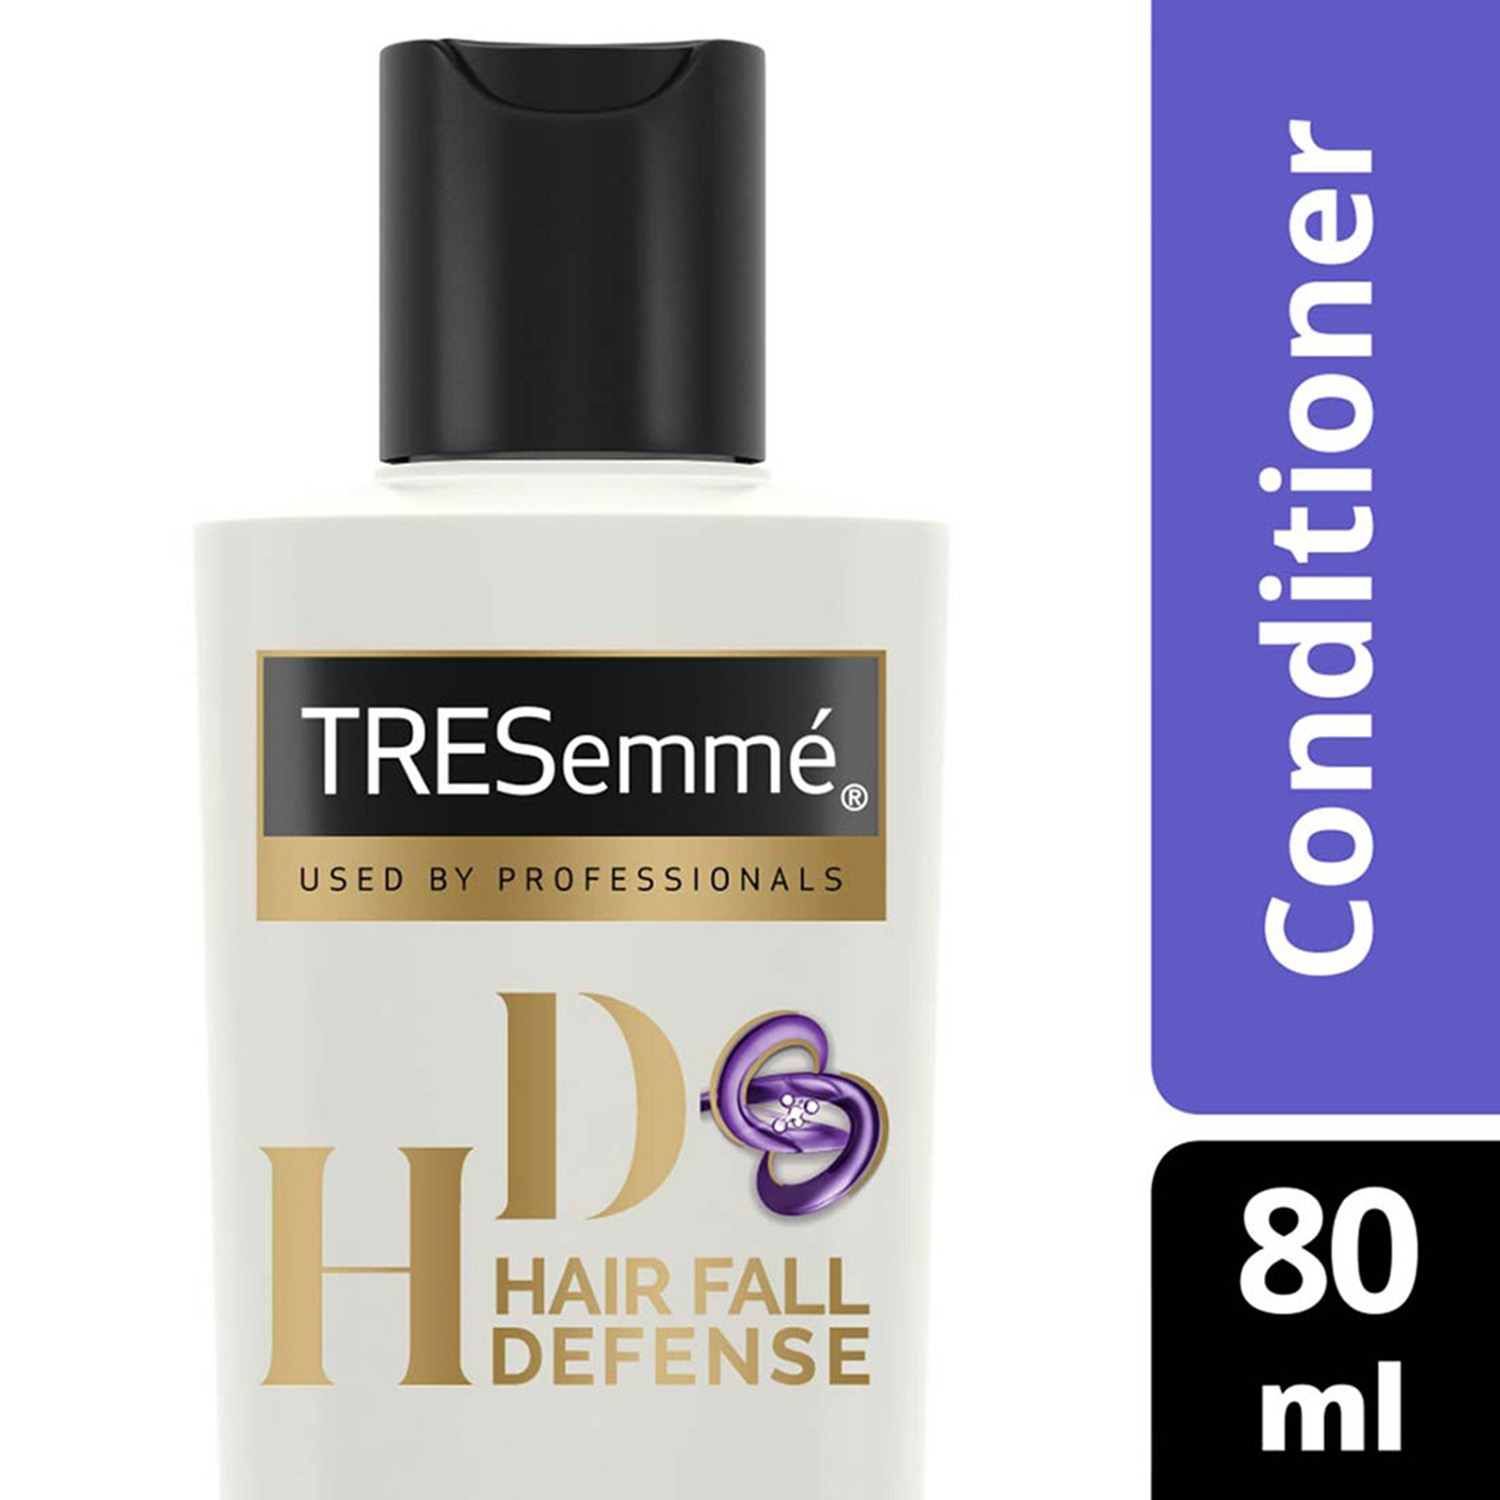 Tresemme | Tresemme Hair Fall Defense Conditioner - (80ml)